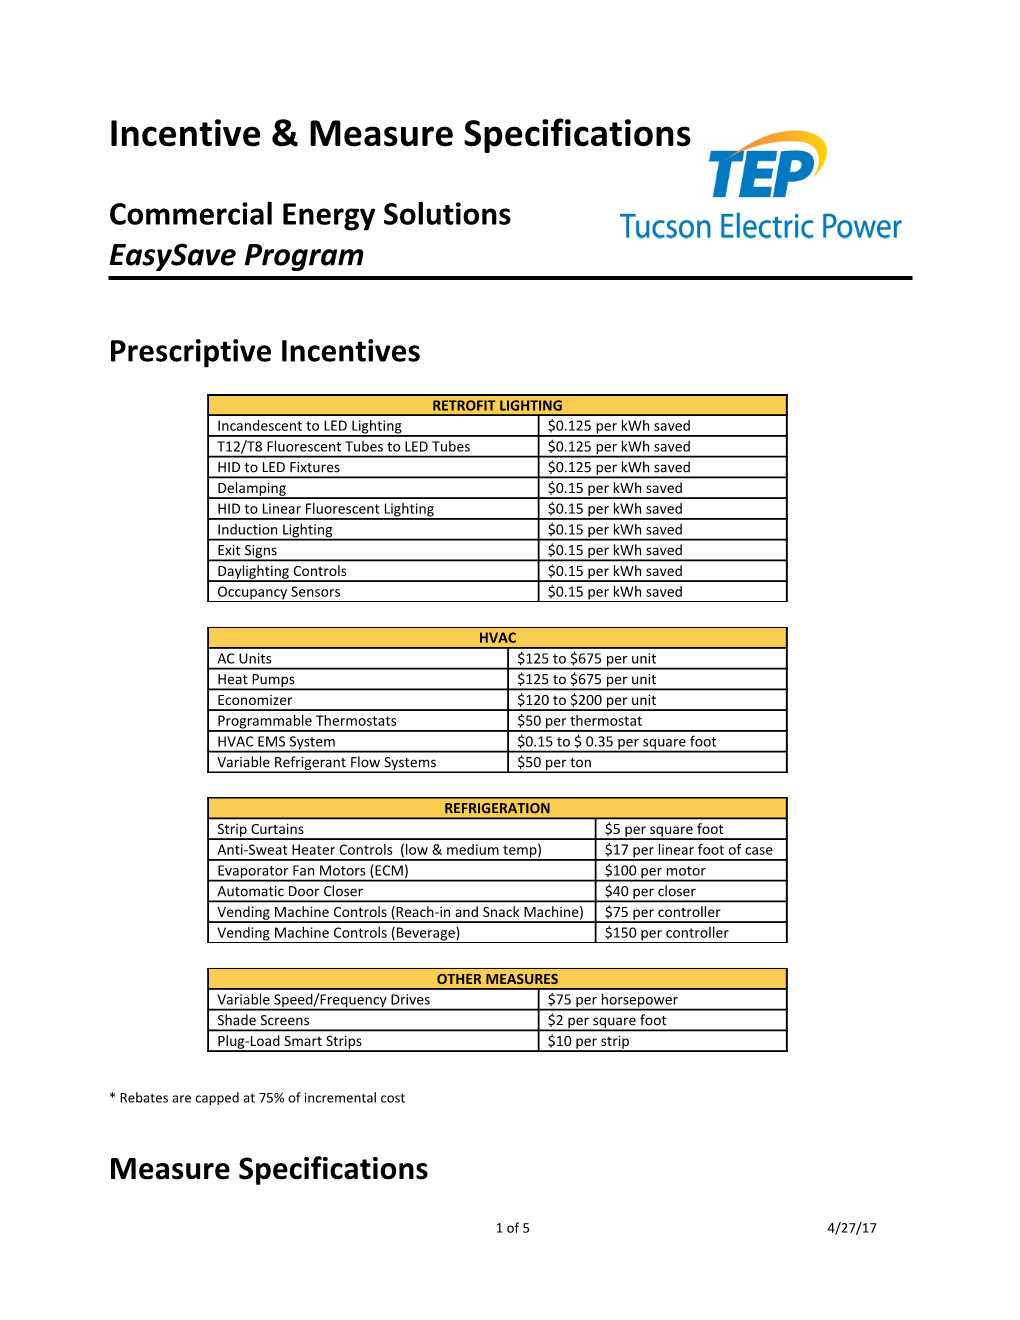 Specifications for Refrigeration Measures